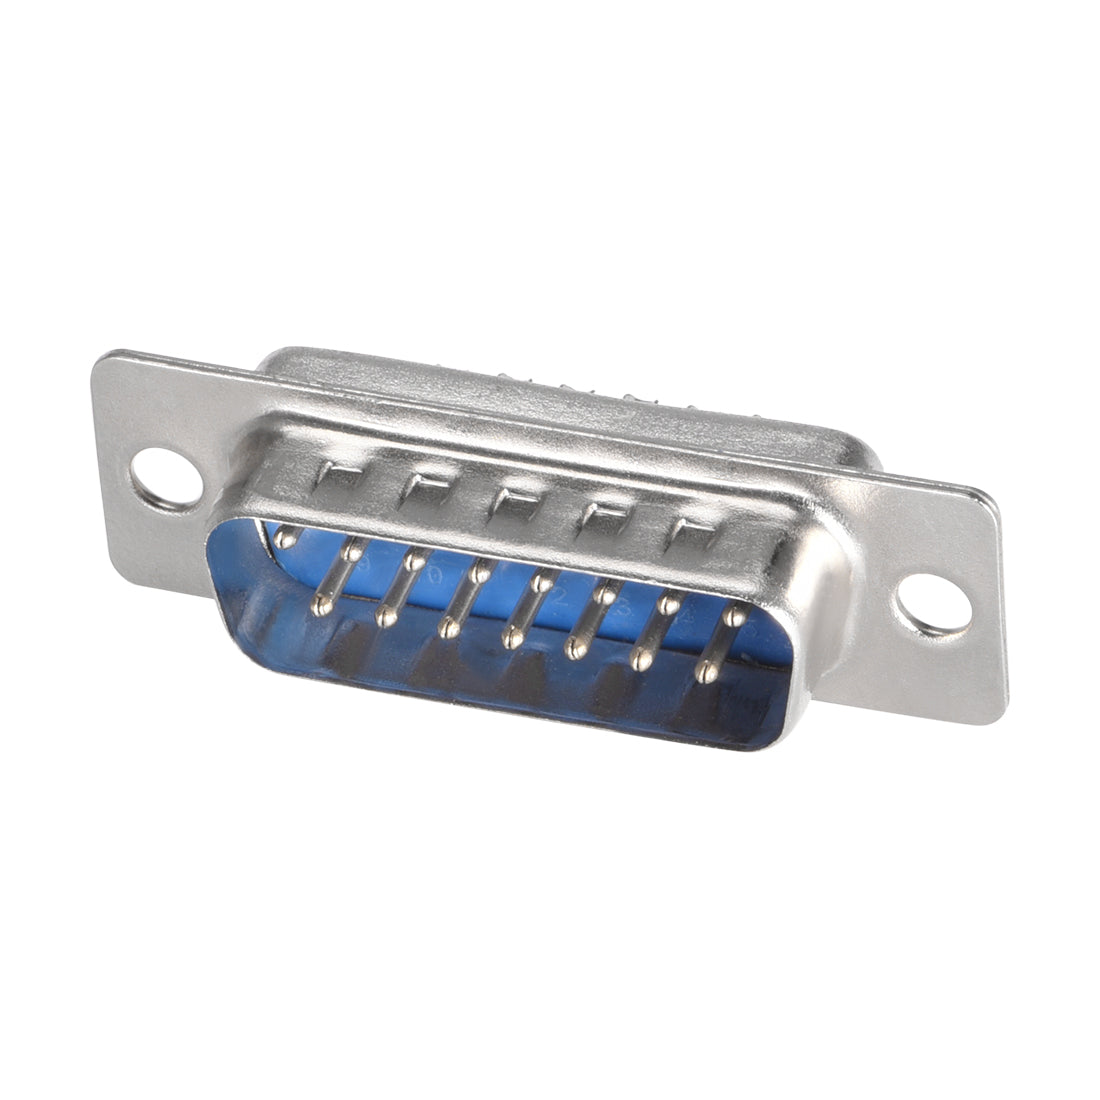 uxcell Uxcell D-sub Connector Male Plug 15-pin 2-row Port Terminal Breakout Solder Type for Mechanical Equipment CNC Computers Blue 20pcs